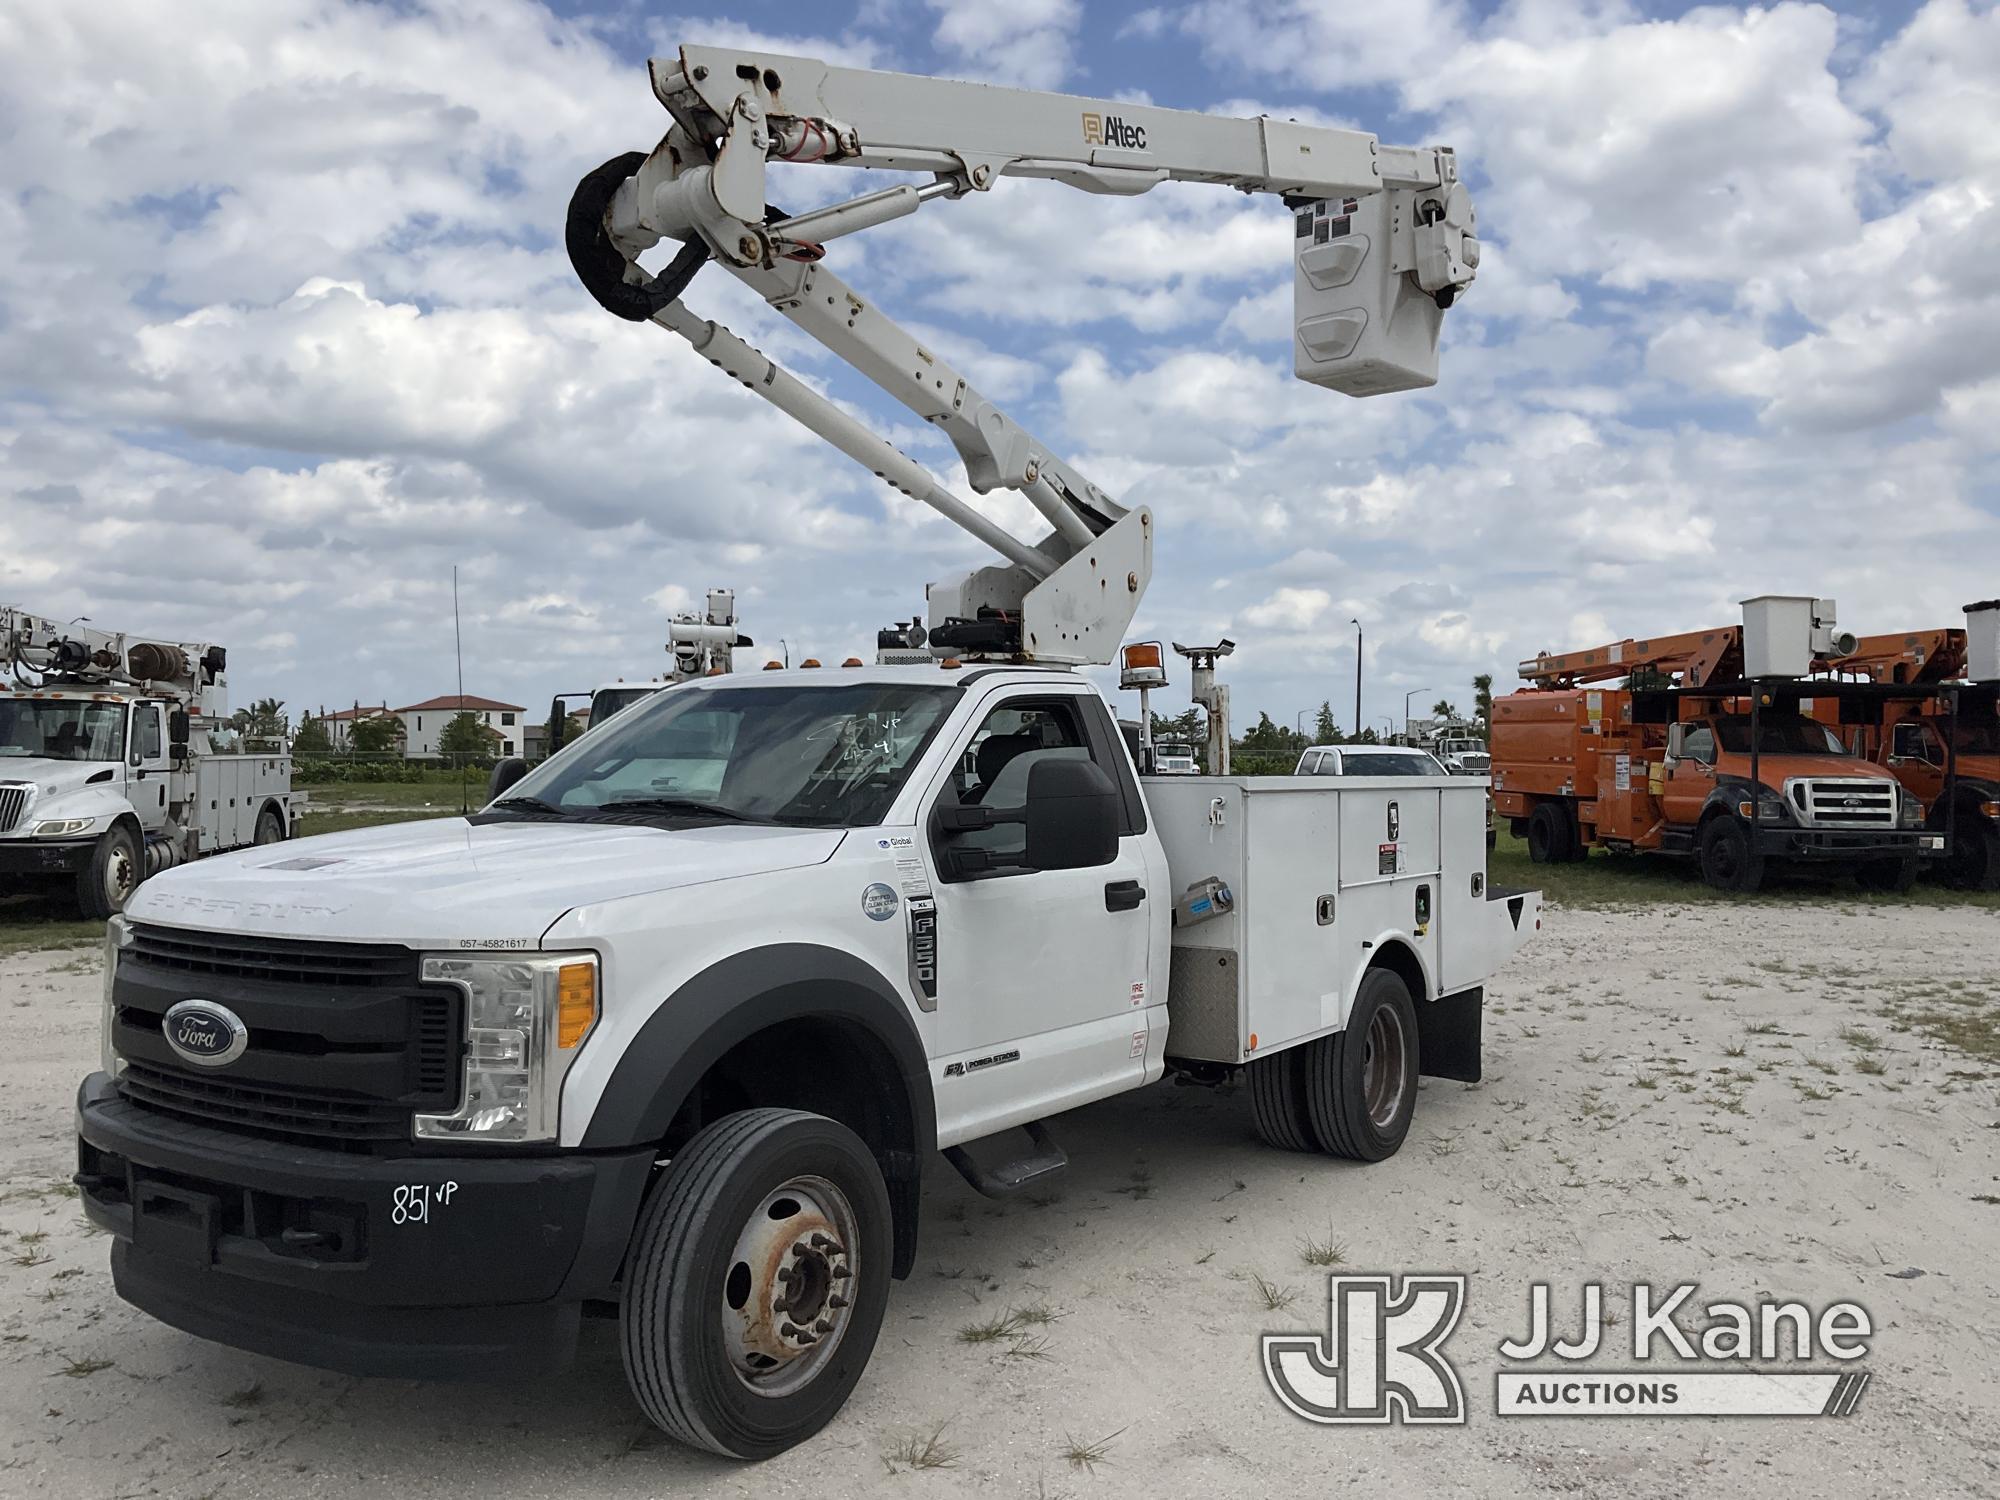 (Westlake, FL) Altec AT40G, Articulating & Telescopic Bucket Truck mounted behind cab on 2017 Ford F